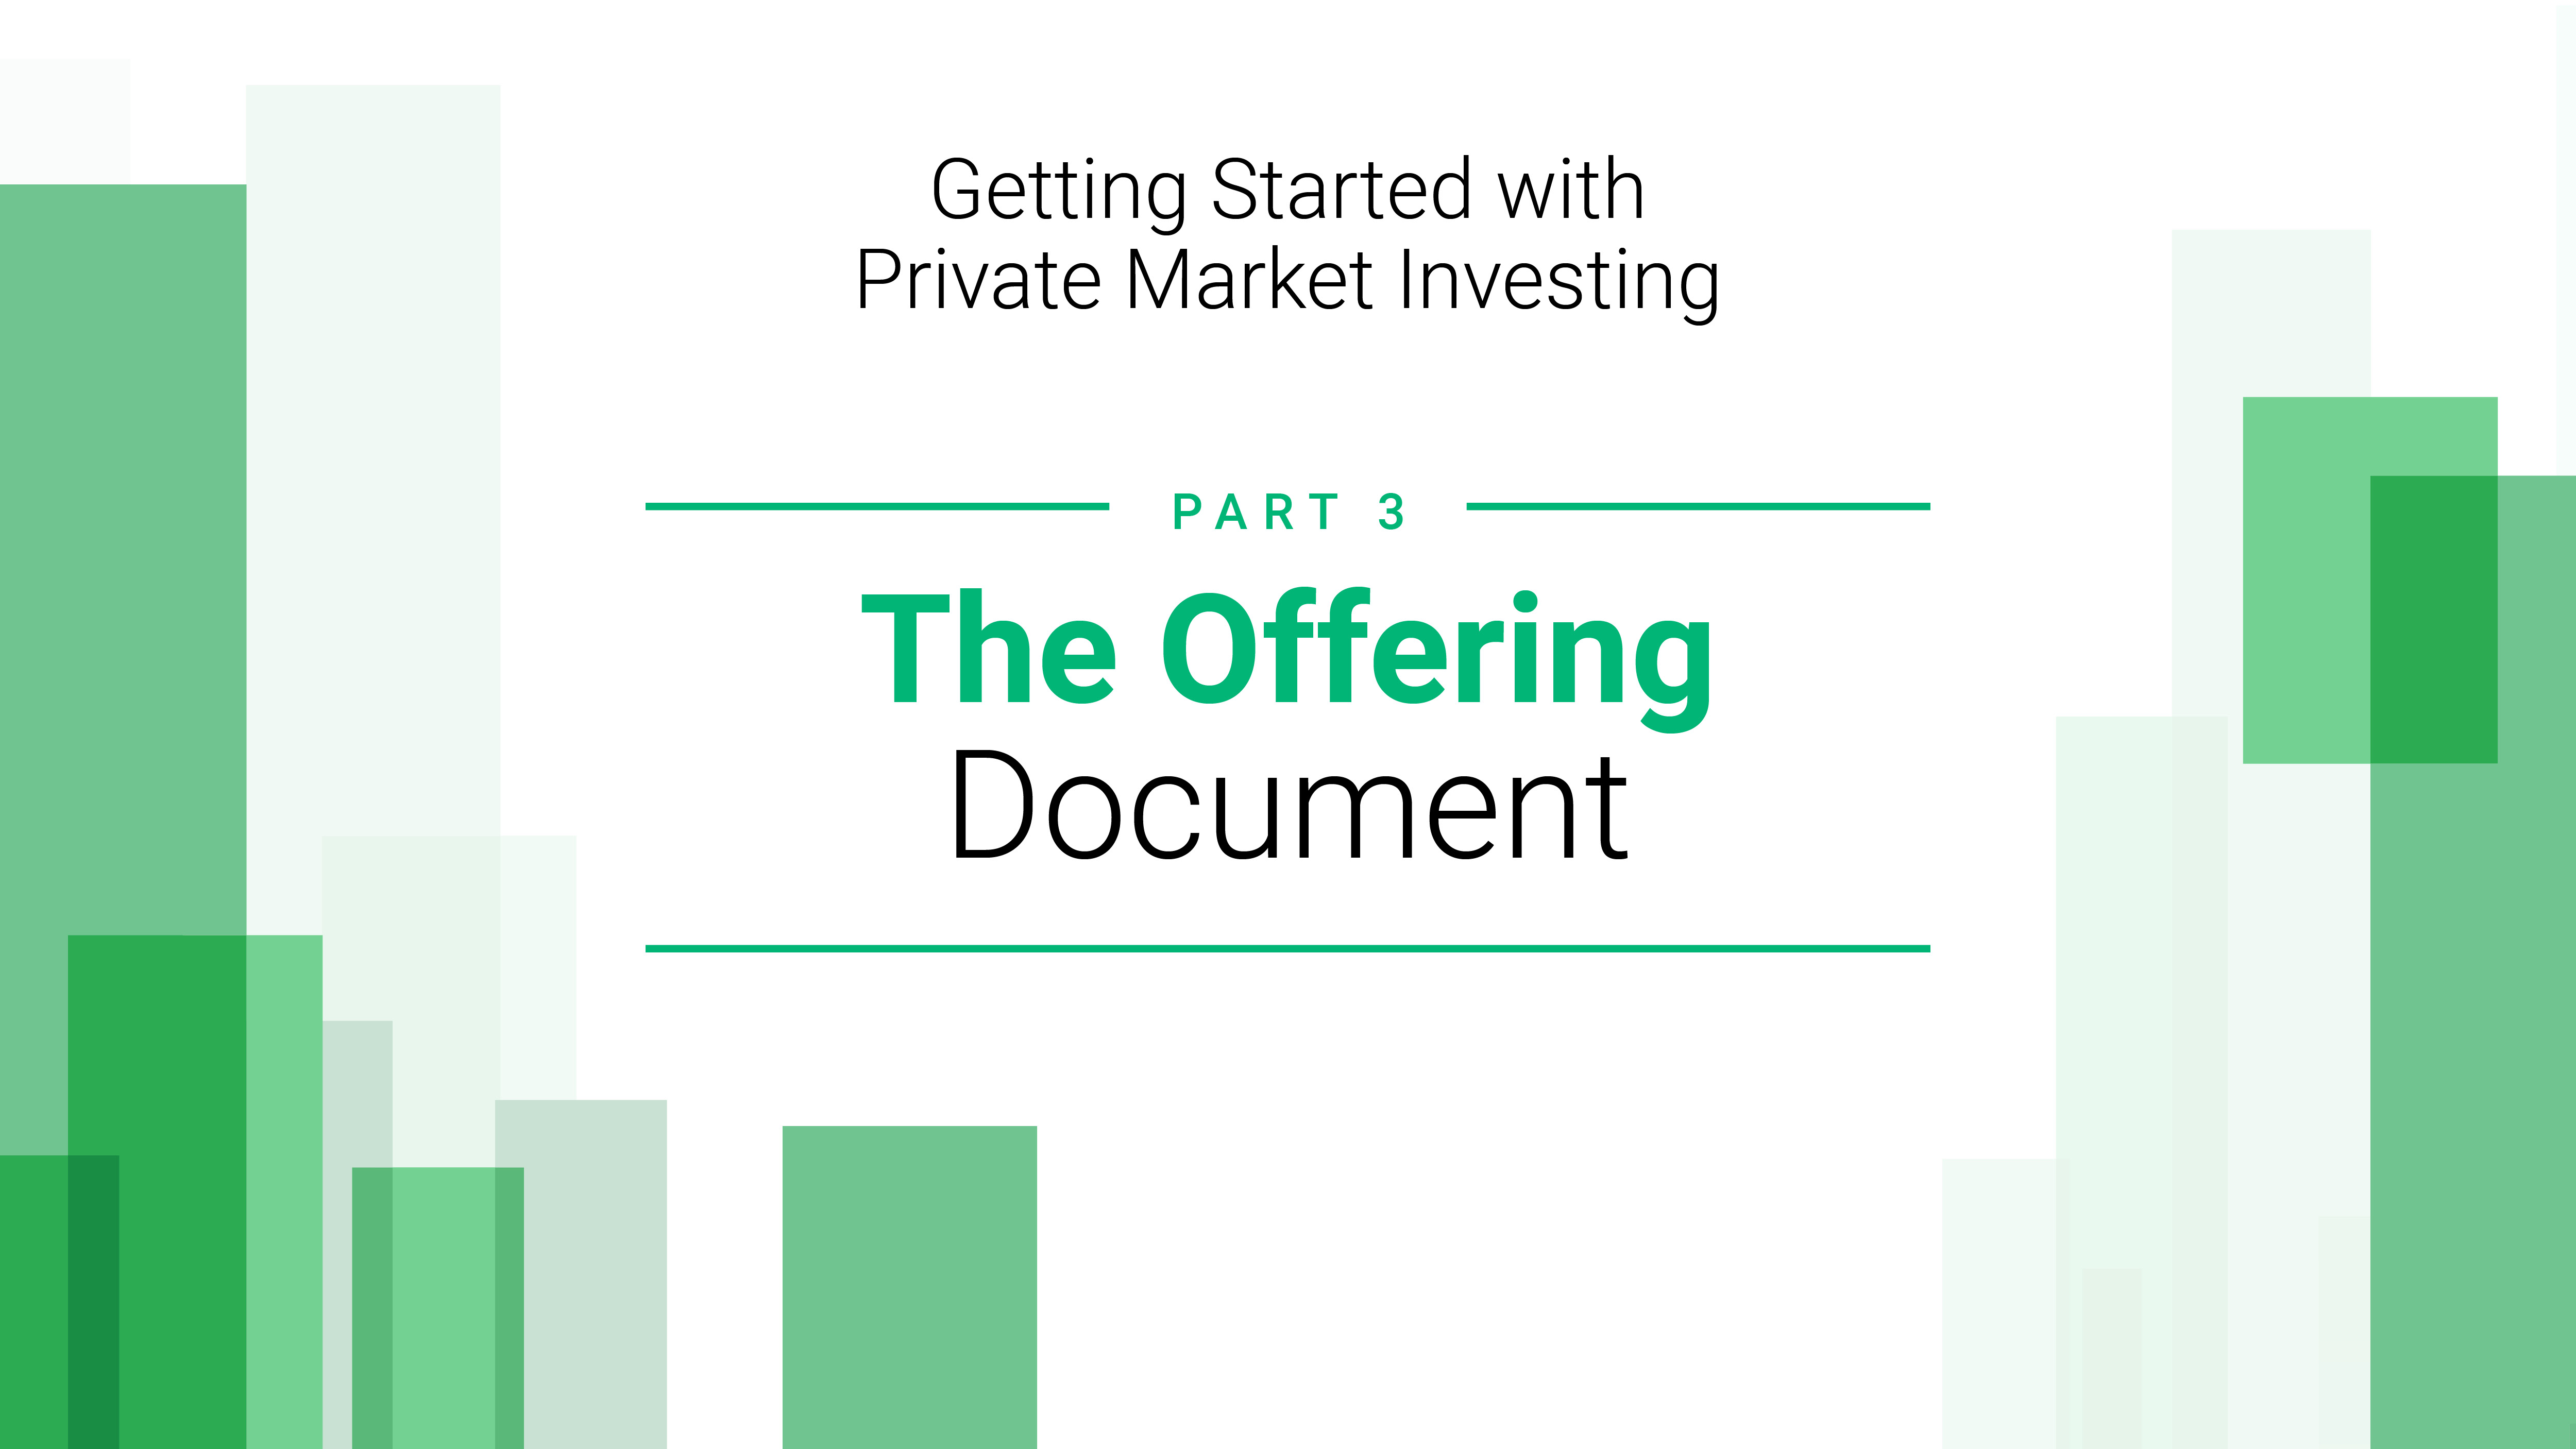 Getting Started with Private Market Investing: Part III - The Offering Document